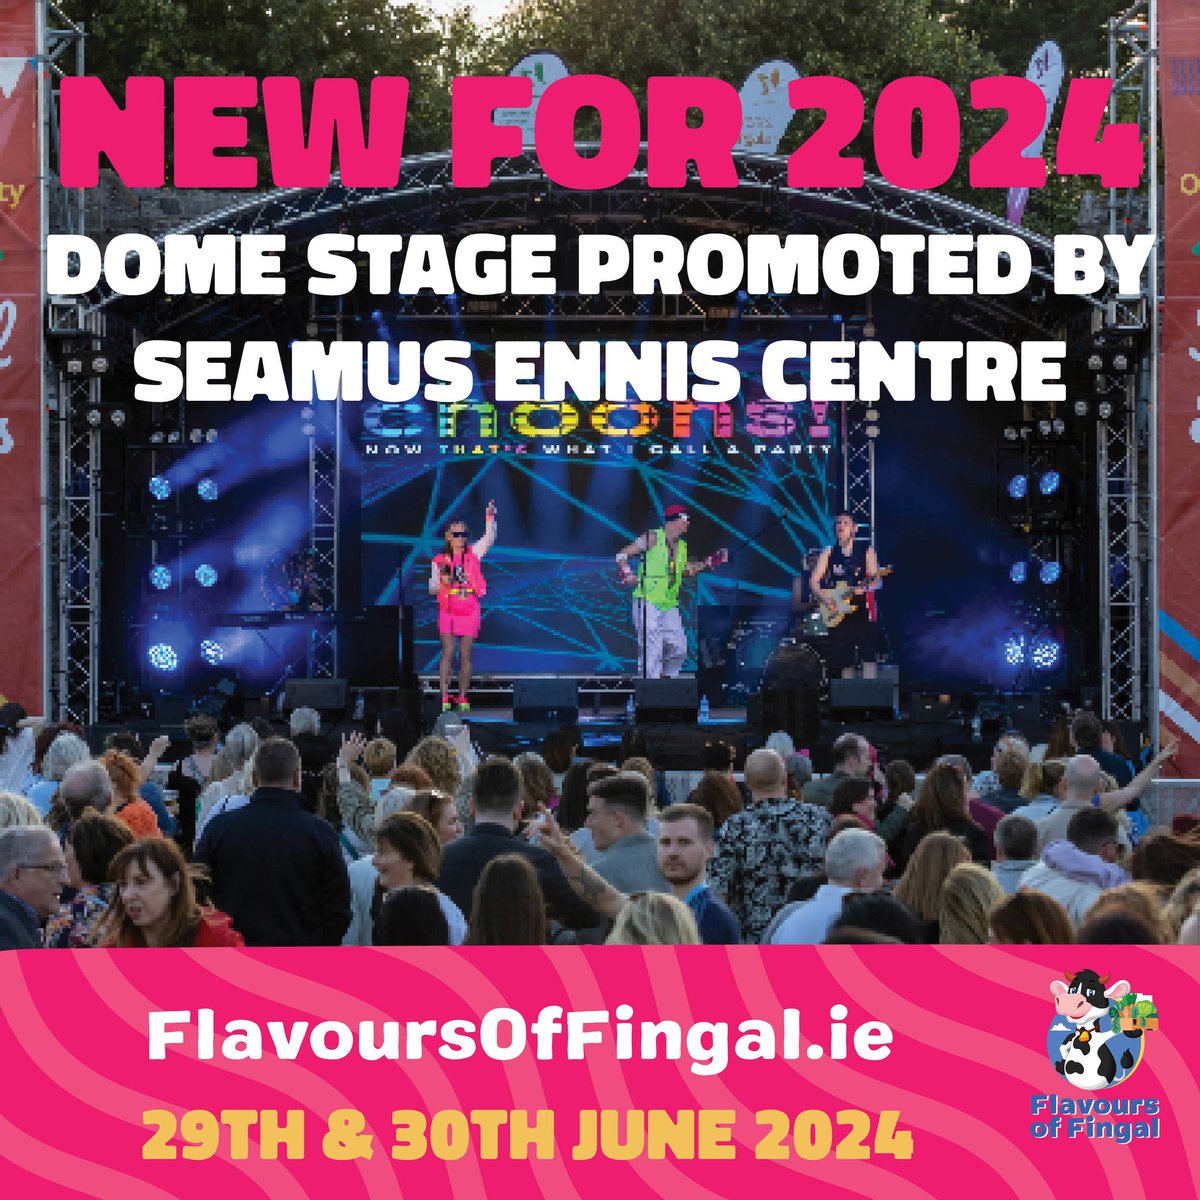 FLAVOURS OF FINGAL! 🗓️ Saturday 29th & Sunday 30th June NEW FOR 2024...Dome Stage Promoted By Seamus Ennis Centre It will be a weekend packed full of Entertainment, Food, Family Fun, Farming & Sport For more information please visit the link below eventsinfingal.ie/events/flavour…